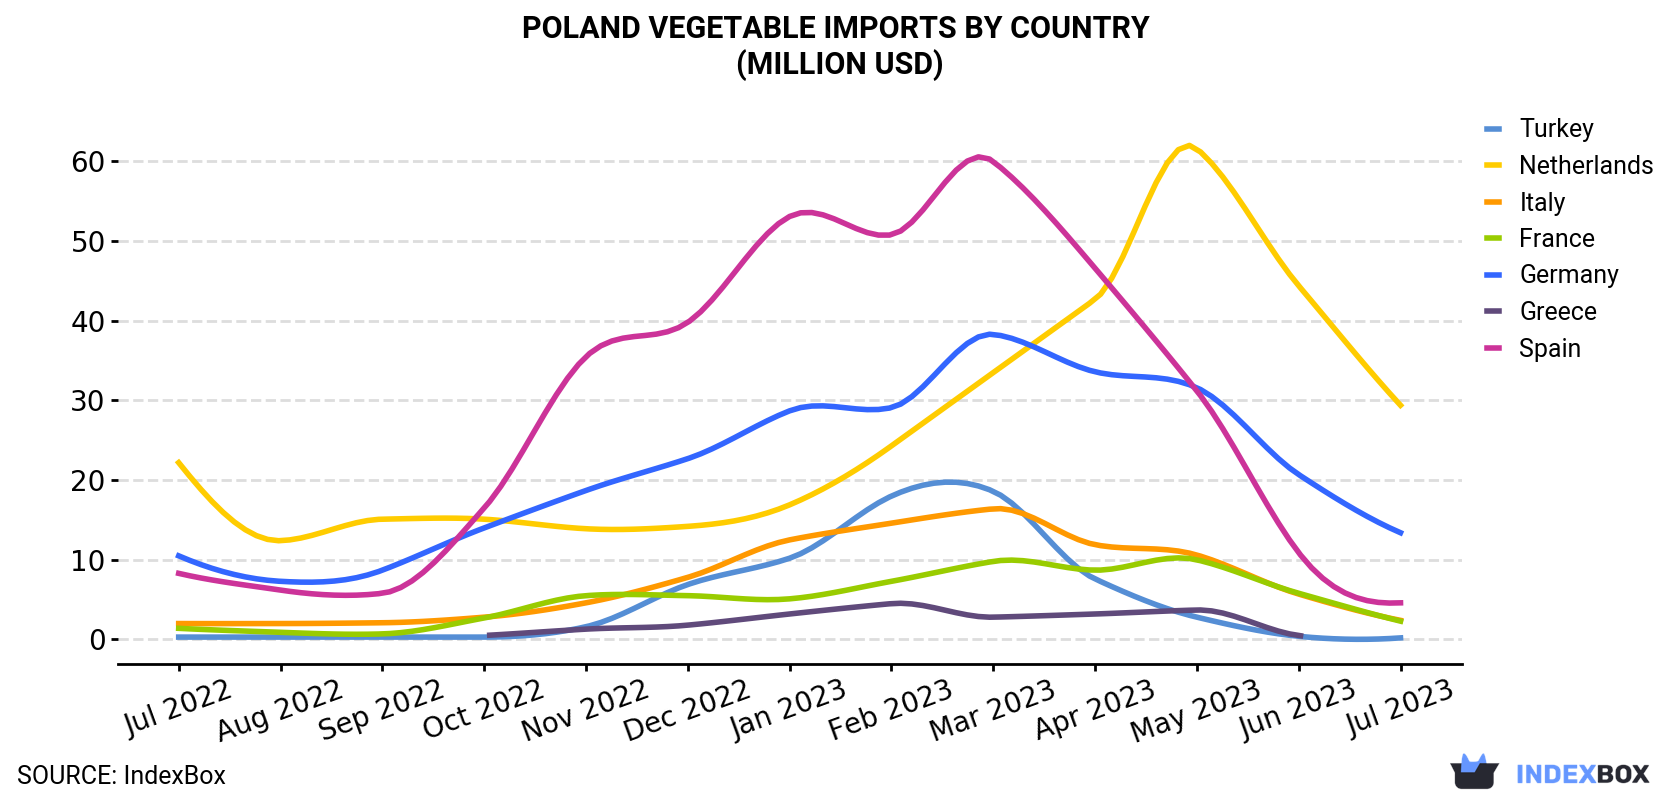 Poland Vegetable Imports By Country (Million USD)